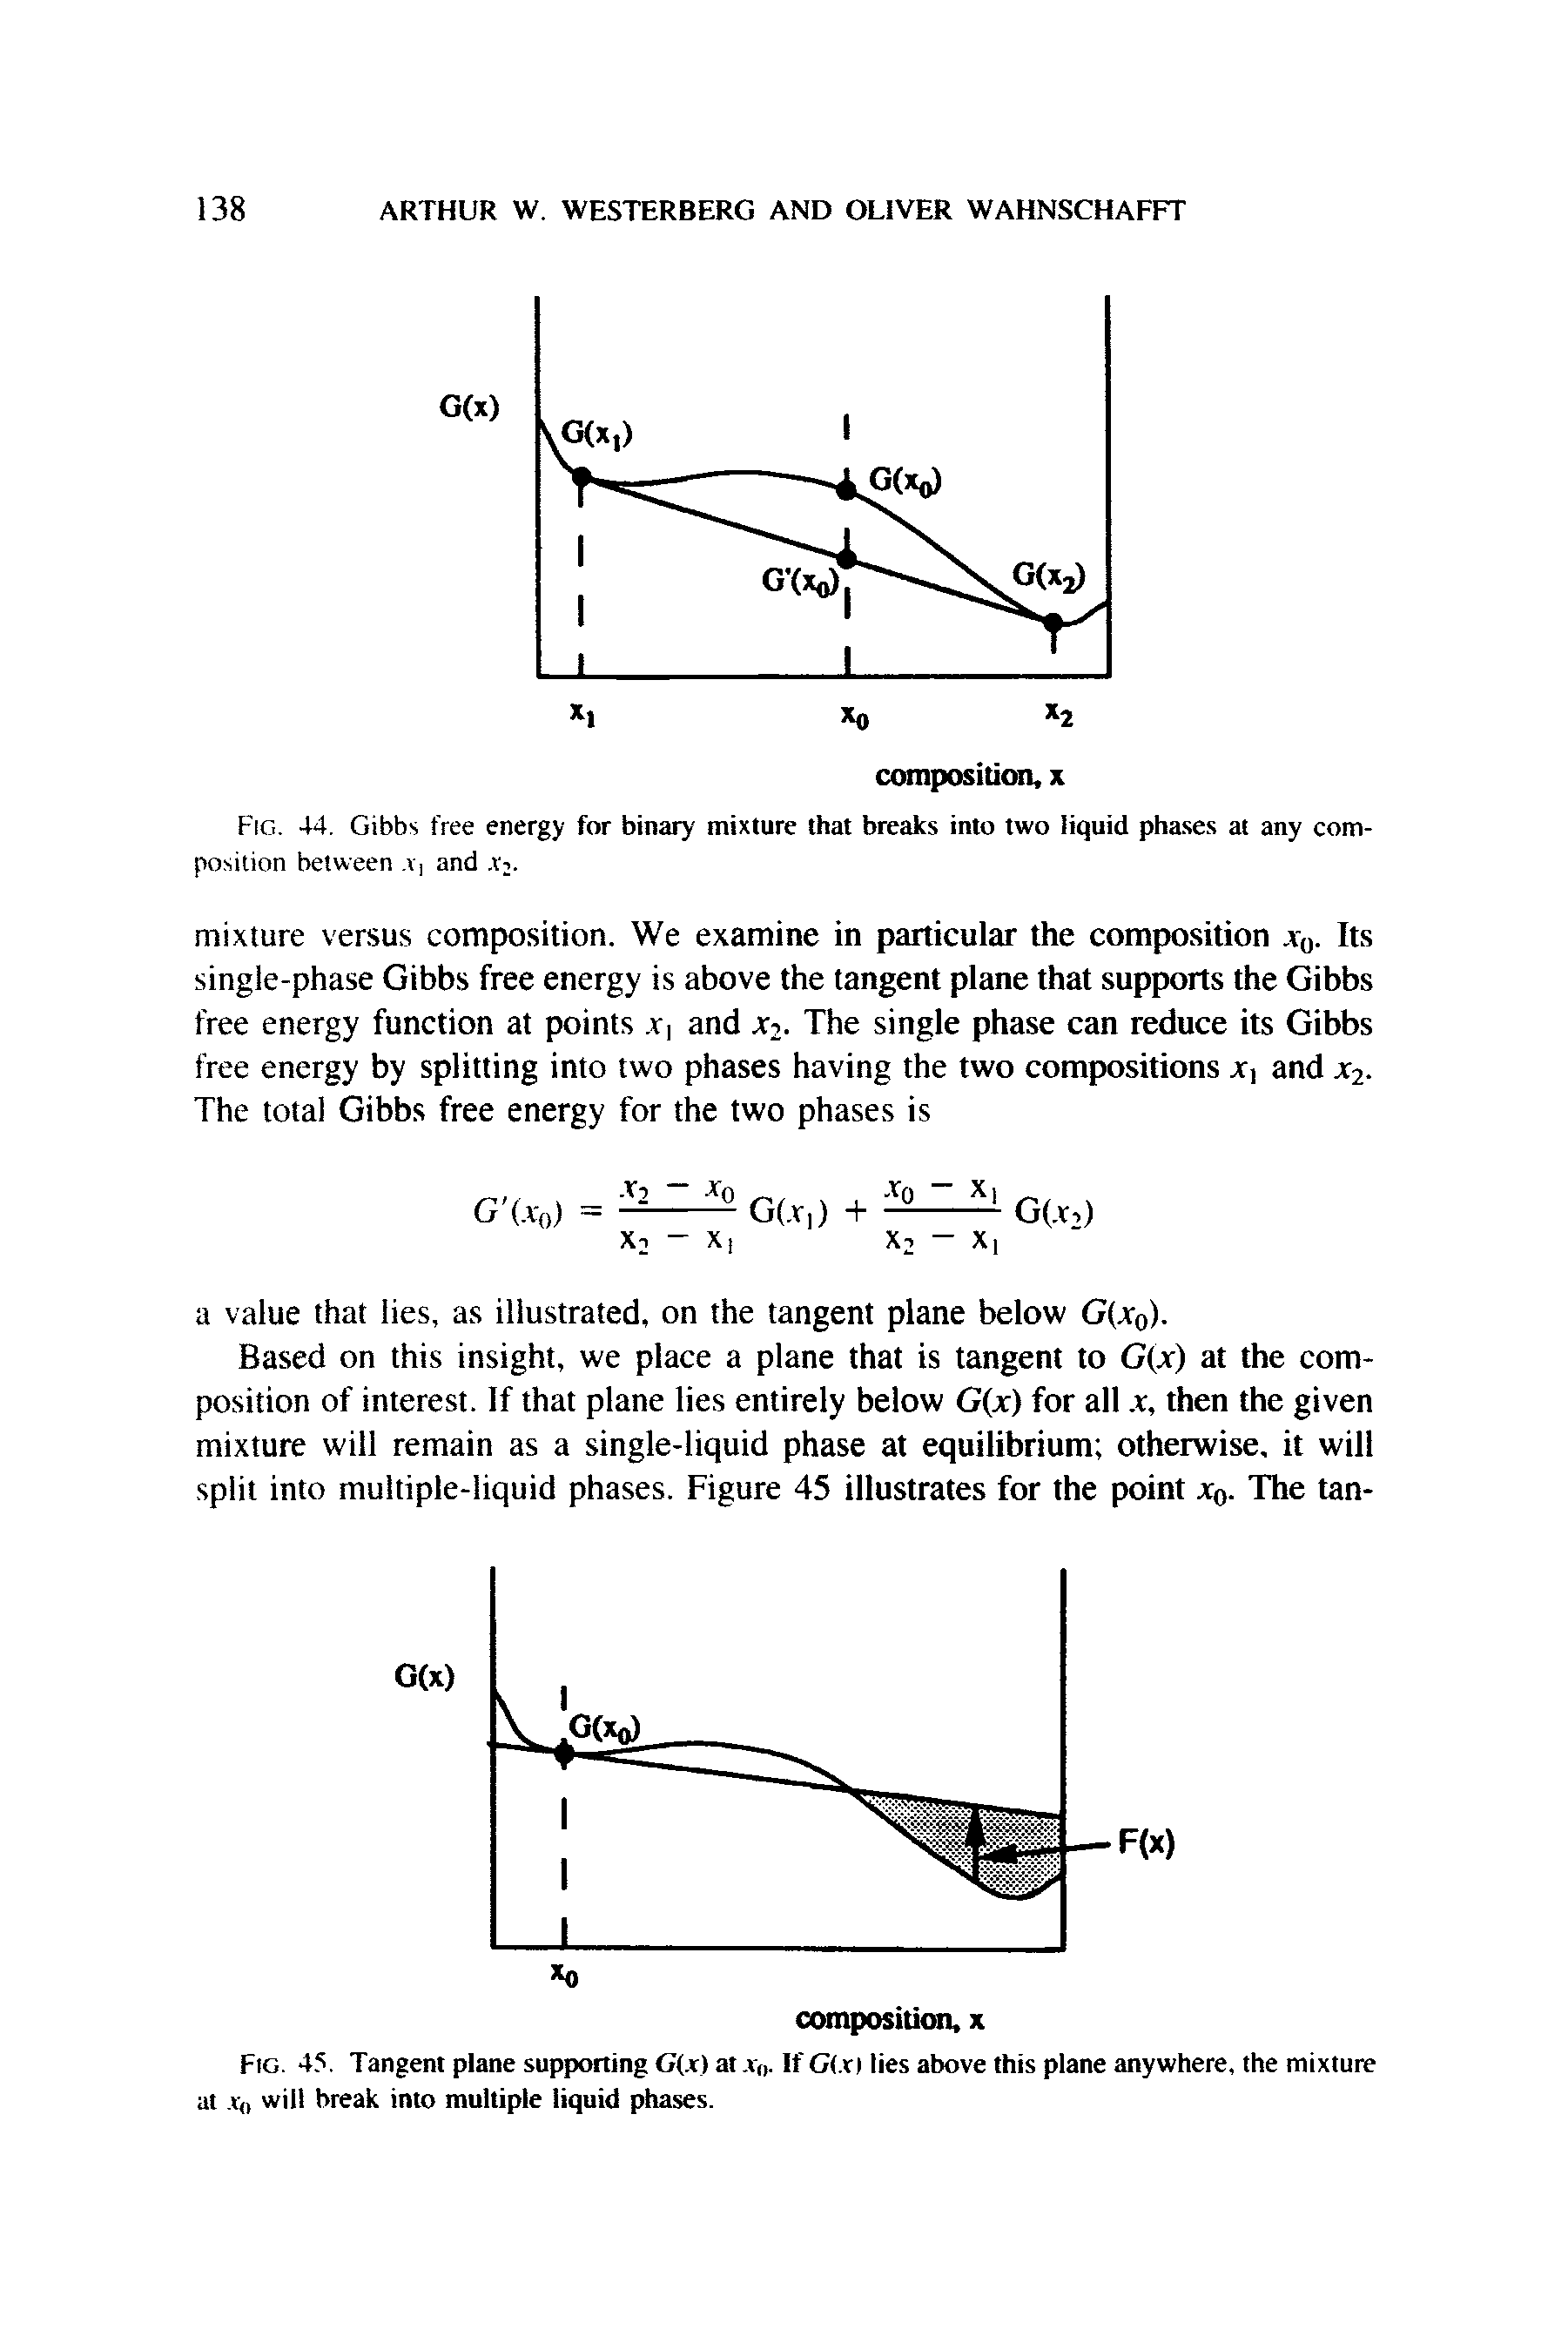 Fig. 44. Gibbs free energy for binary mixture that breaks into two liquid phases at any composition between. V and. Vi.